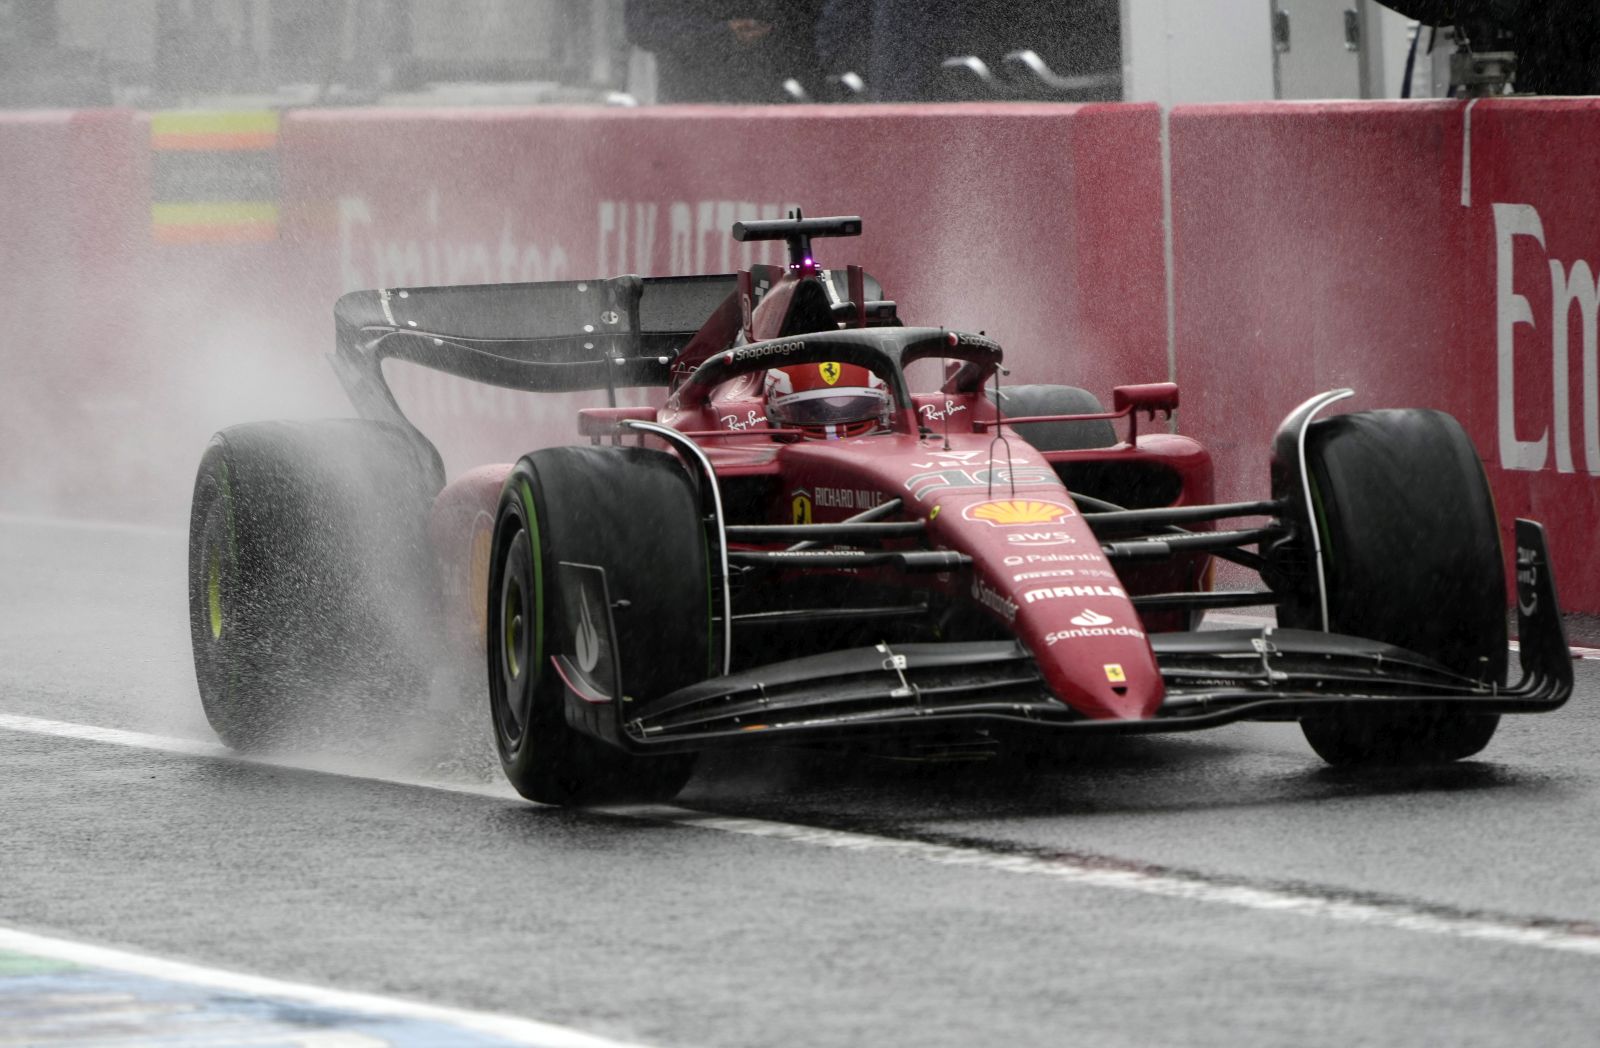 epa10228544 Monaco's Formula One driver Charles Leclerc of Scuderia Ferrari steers his car in the pit lane during the first practice session of the Japanese Formula One Grand Prix in Suzuka, Japan, 07 October 2022. The Japanese Formula One Grand Prix will take place on 09 October 2022.  EPA/FRANCK ROBICHON